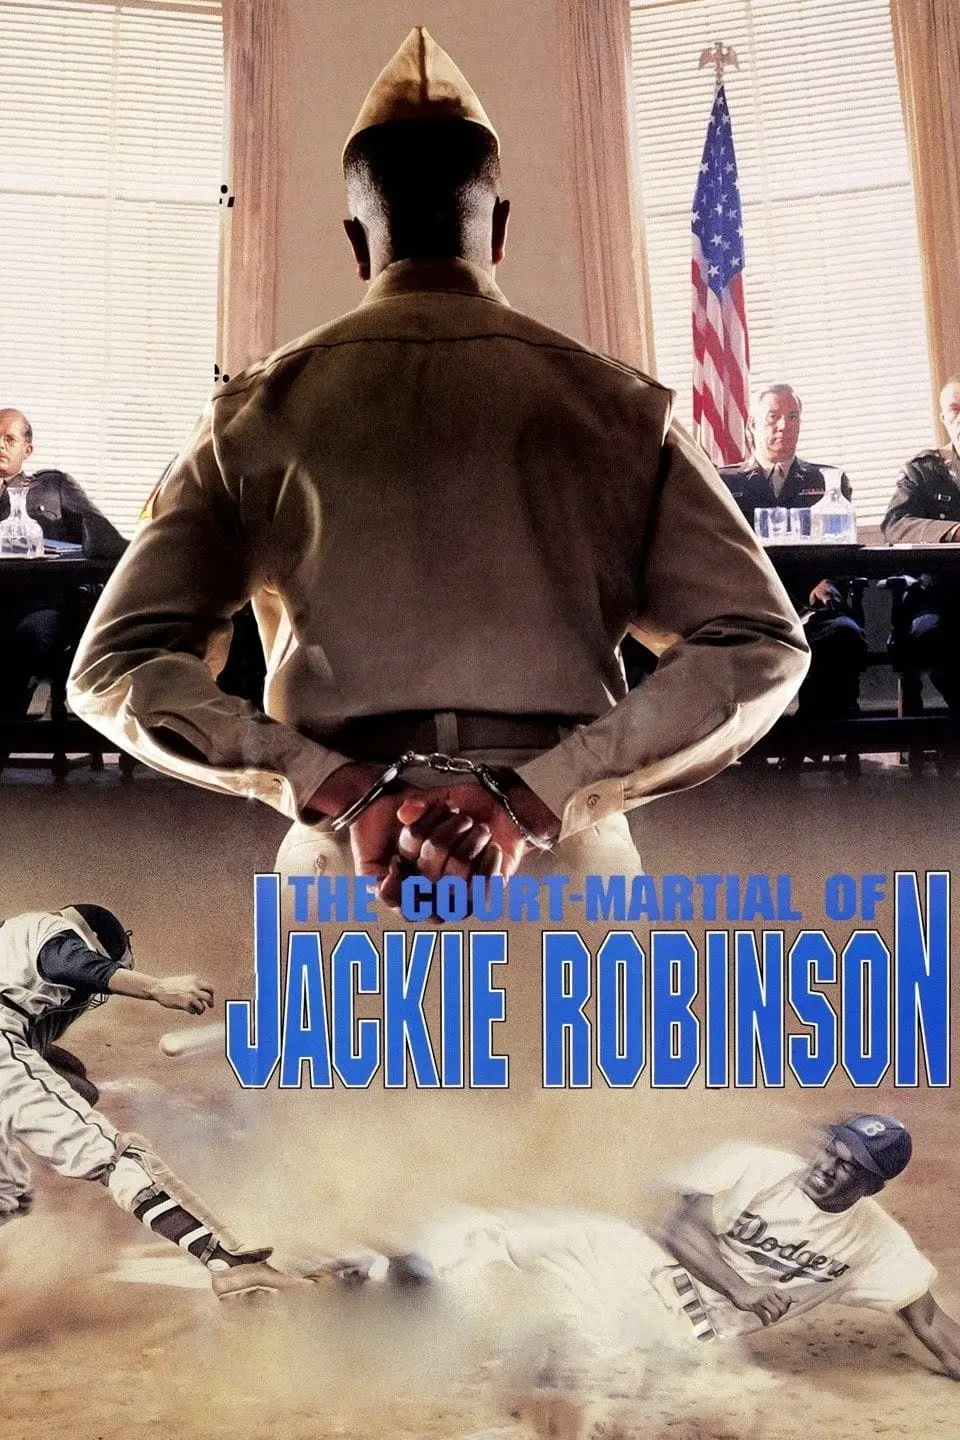 The Court-Martial of Jackie Robinson_peliplat